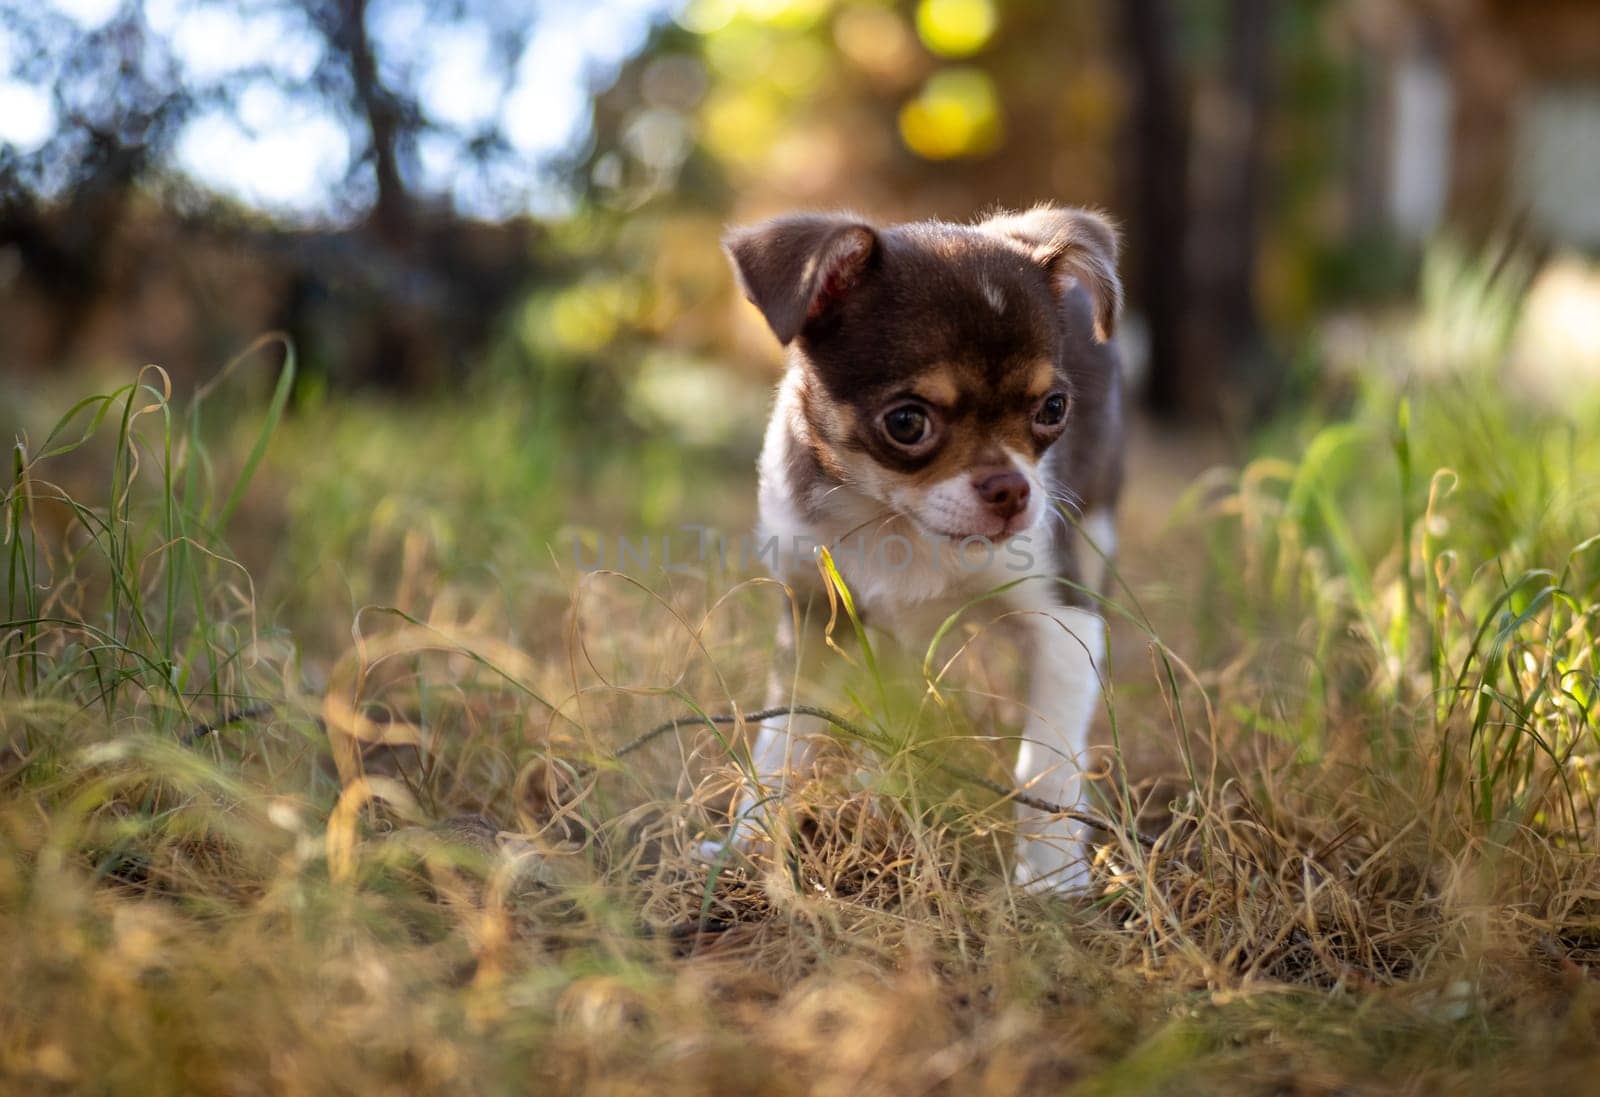 A tiny Chihuahua puppy appears almost hidden as it stands amidst tall grass, with soft sunlight filtering through trees.